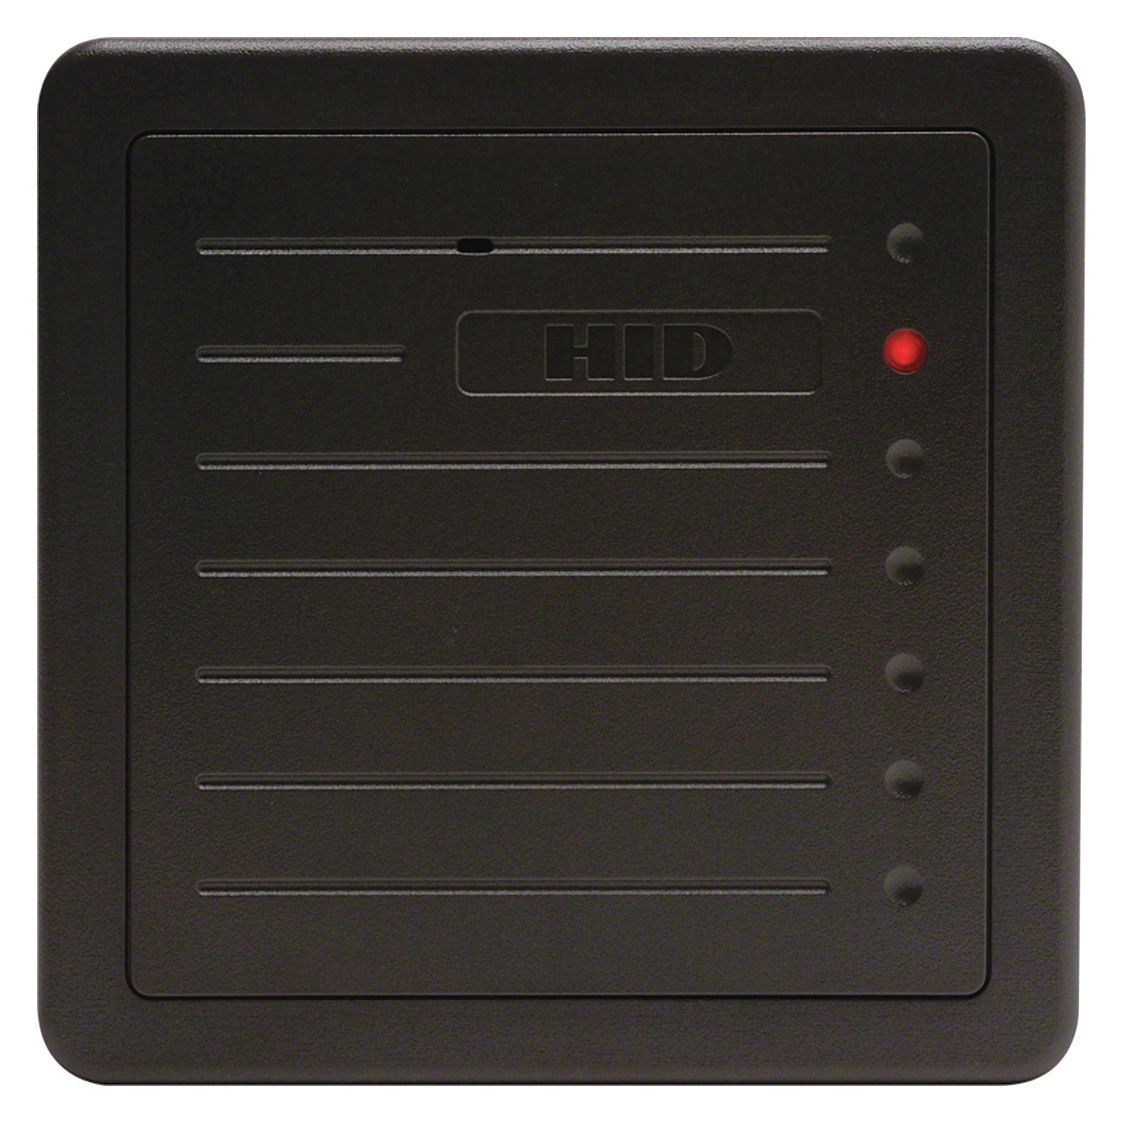 Proximity Reader: Double Gang Switch Proximity Reader, Wiegand Protocol Interface